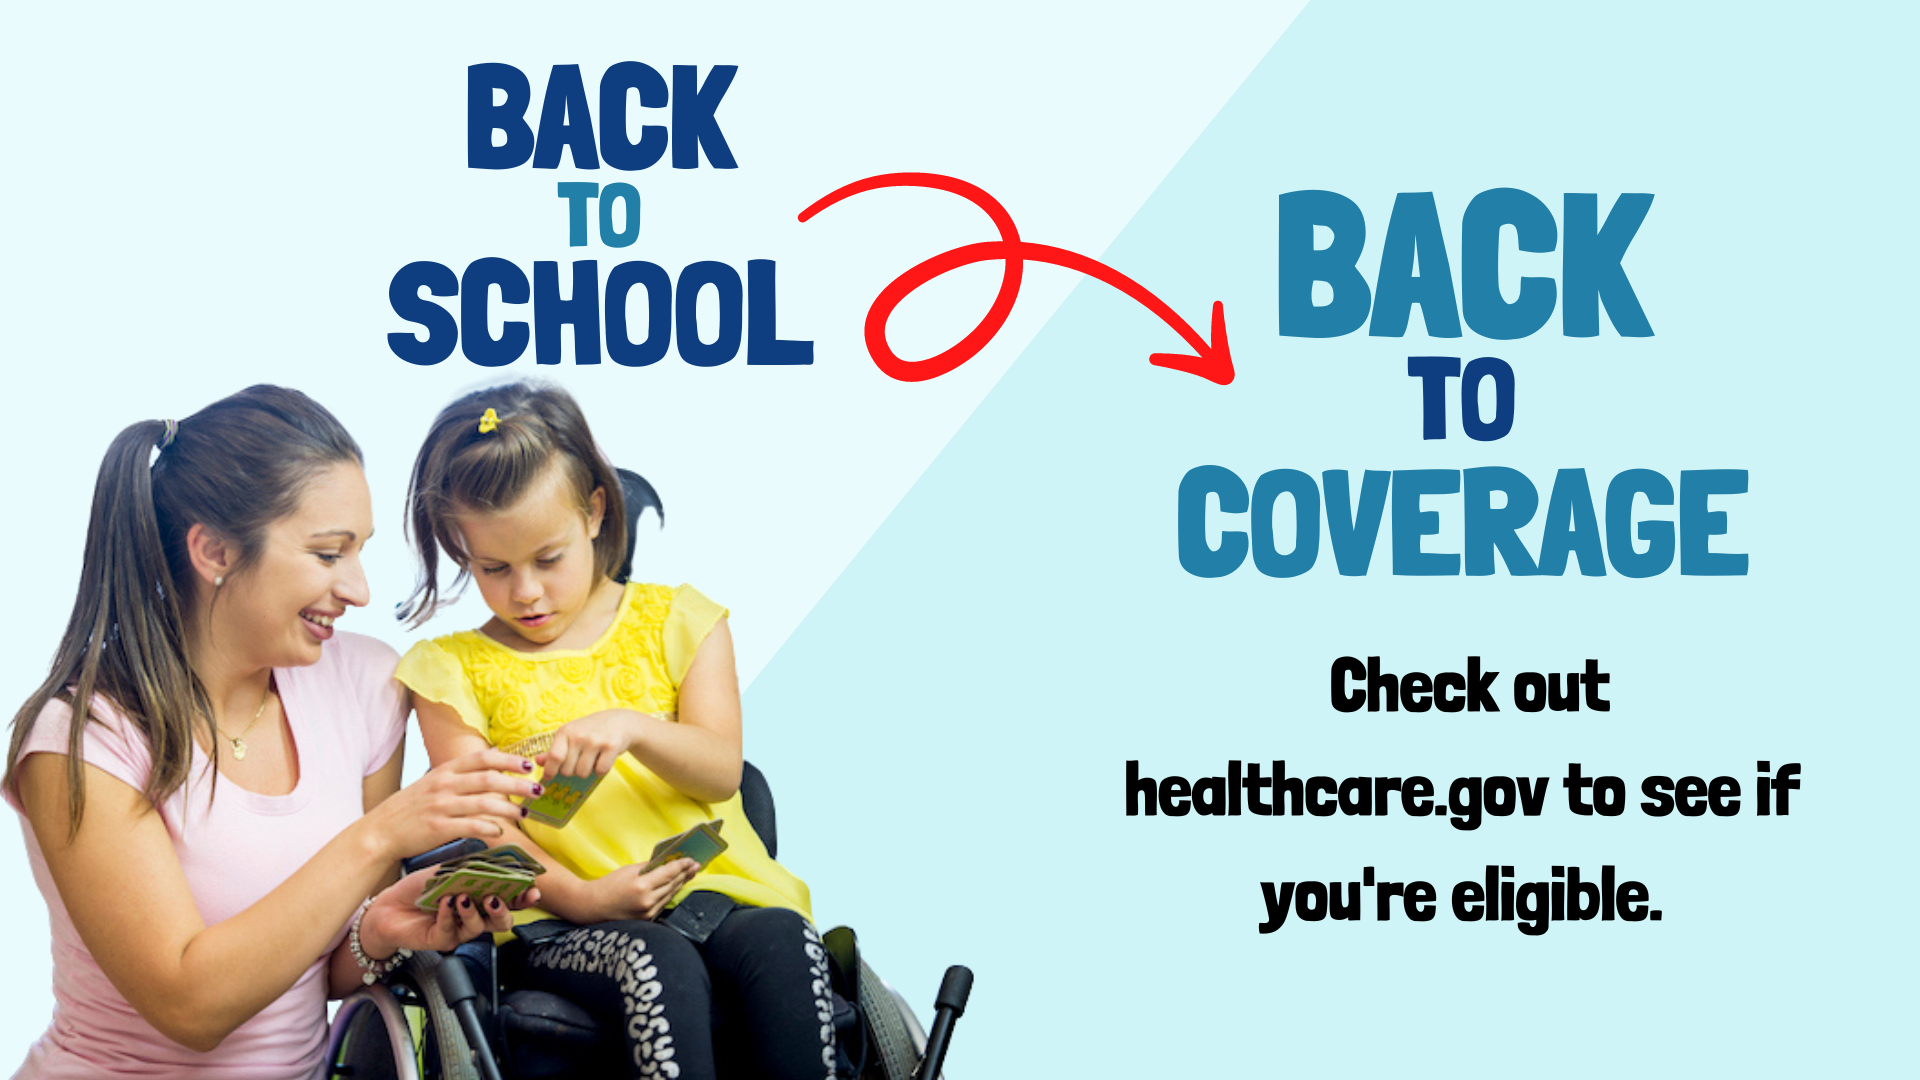 Picture with a woman sitting next to a young girl in a wheelchair looking at a card game with the message “back to school” and an arrow pointing to a message “back to coverage. Check out healthcare.gov to see if you’re eligible”.